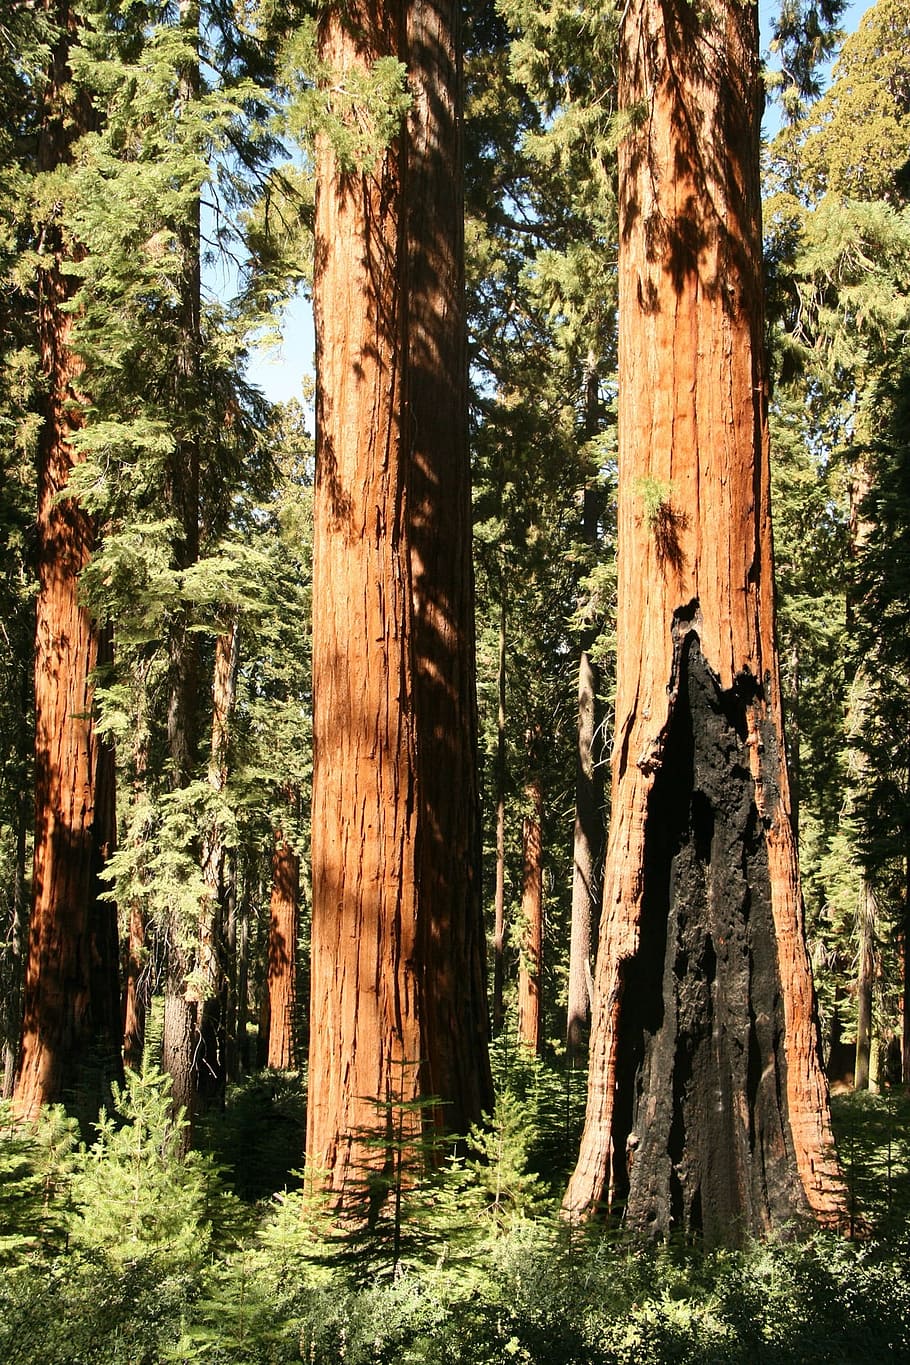 yosemite, giant, redwood, trees, california, tree, organic, agriculture, outdoors, environment